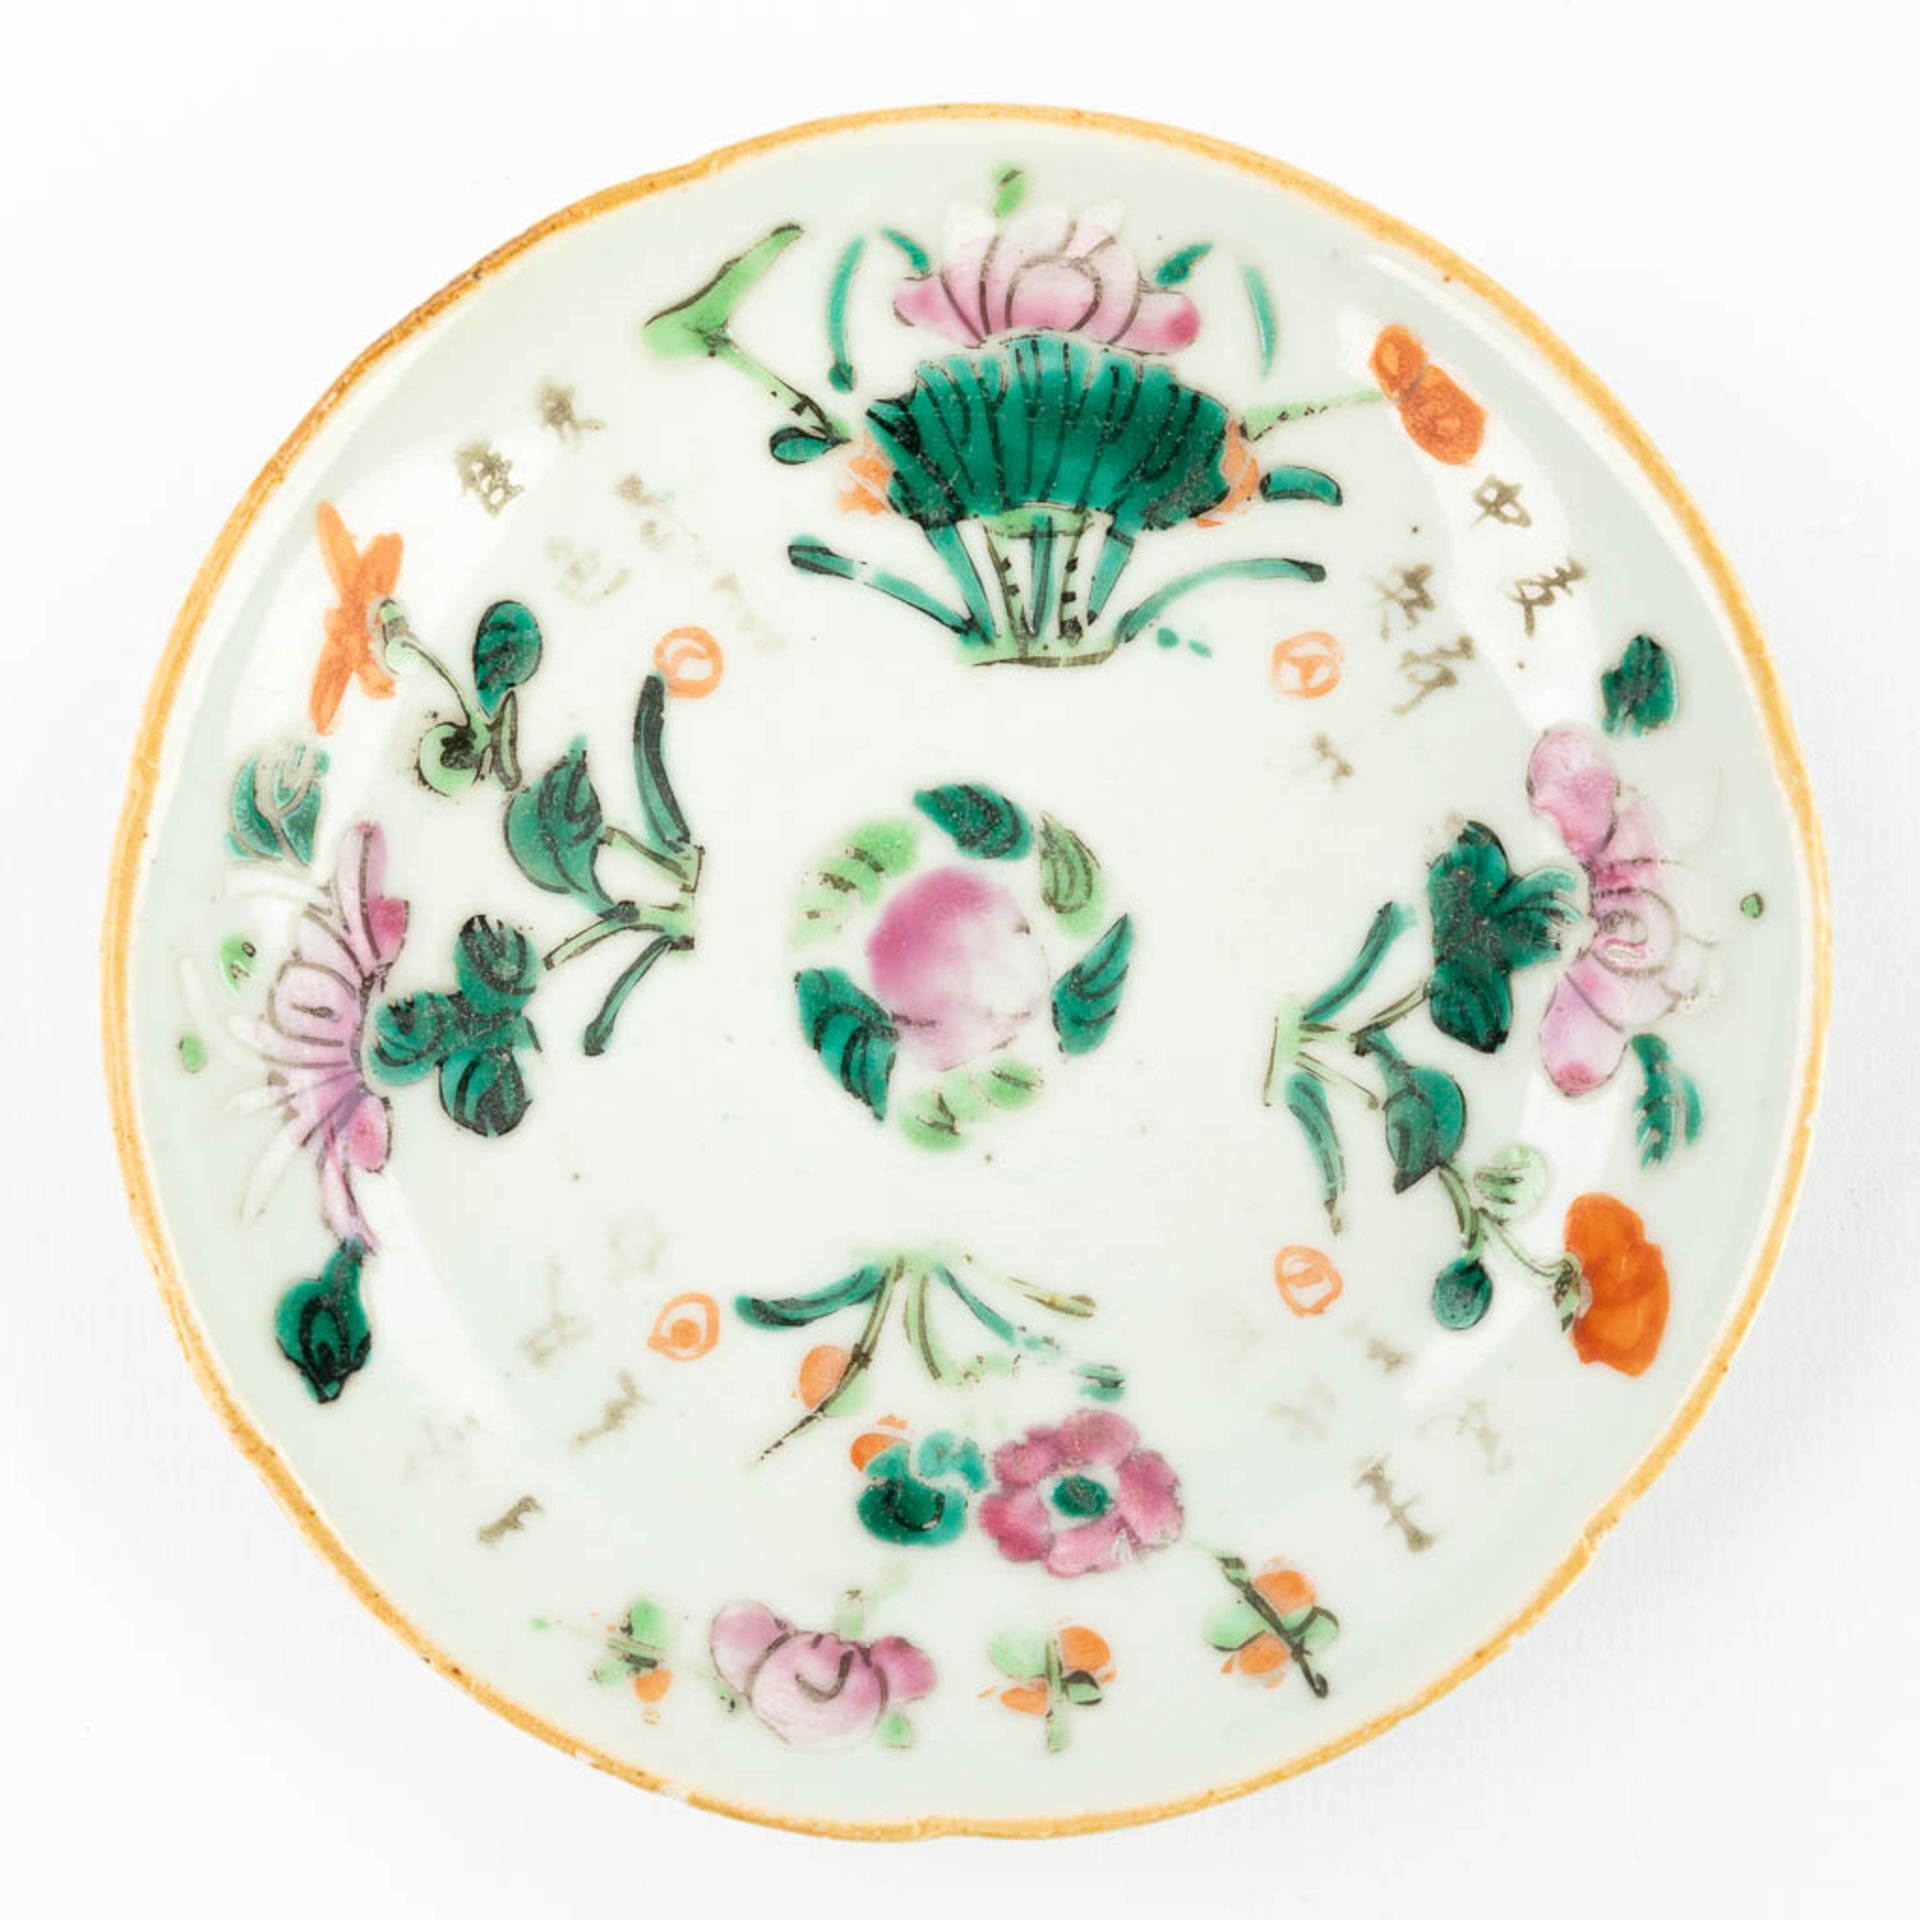 A set of 4 Chinese plates made of porcelain and decorated with peaches and flowers. (13,7 cm) - Image 12 of 14